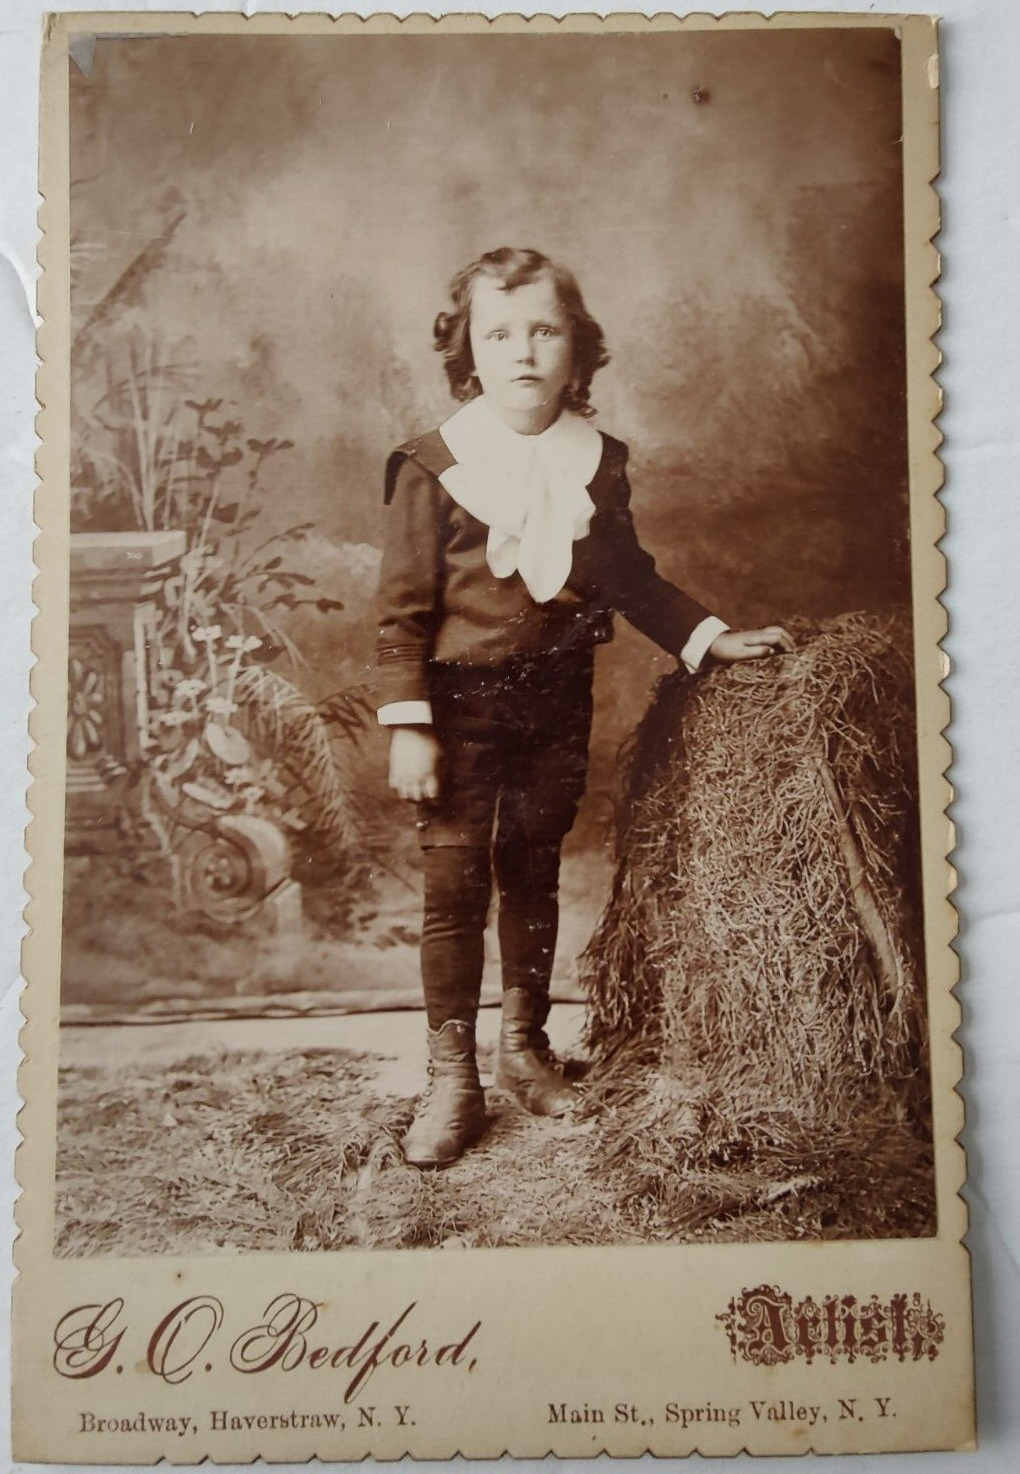 Vintage Cabinet Card Young Boy by G.O. Bedford in Spring Valley, New York